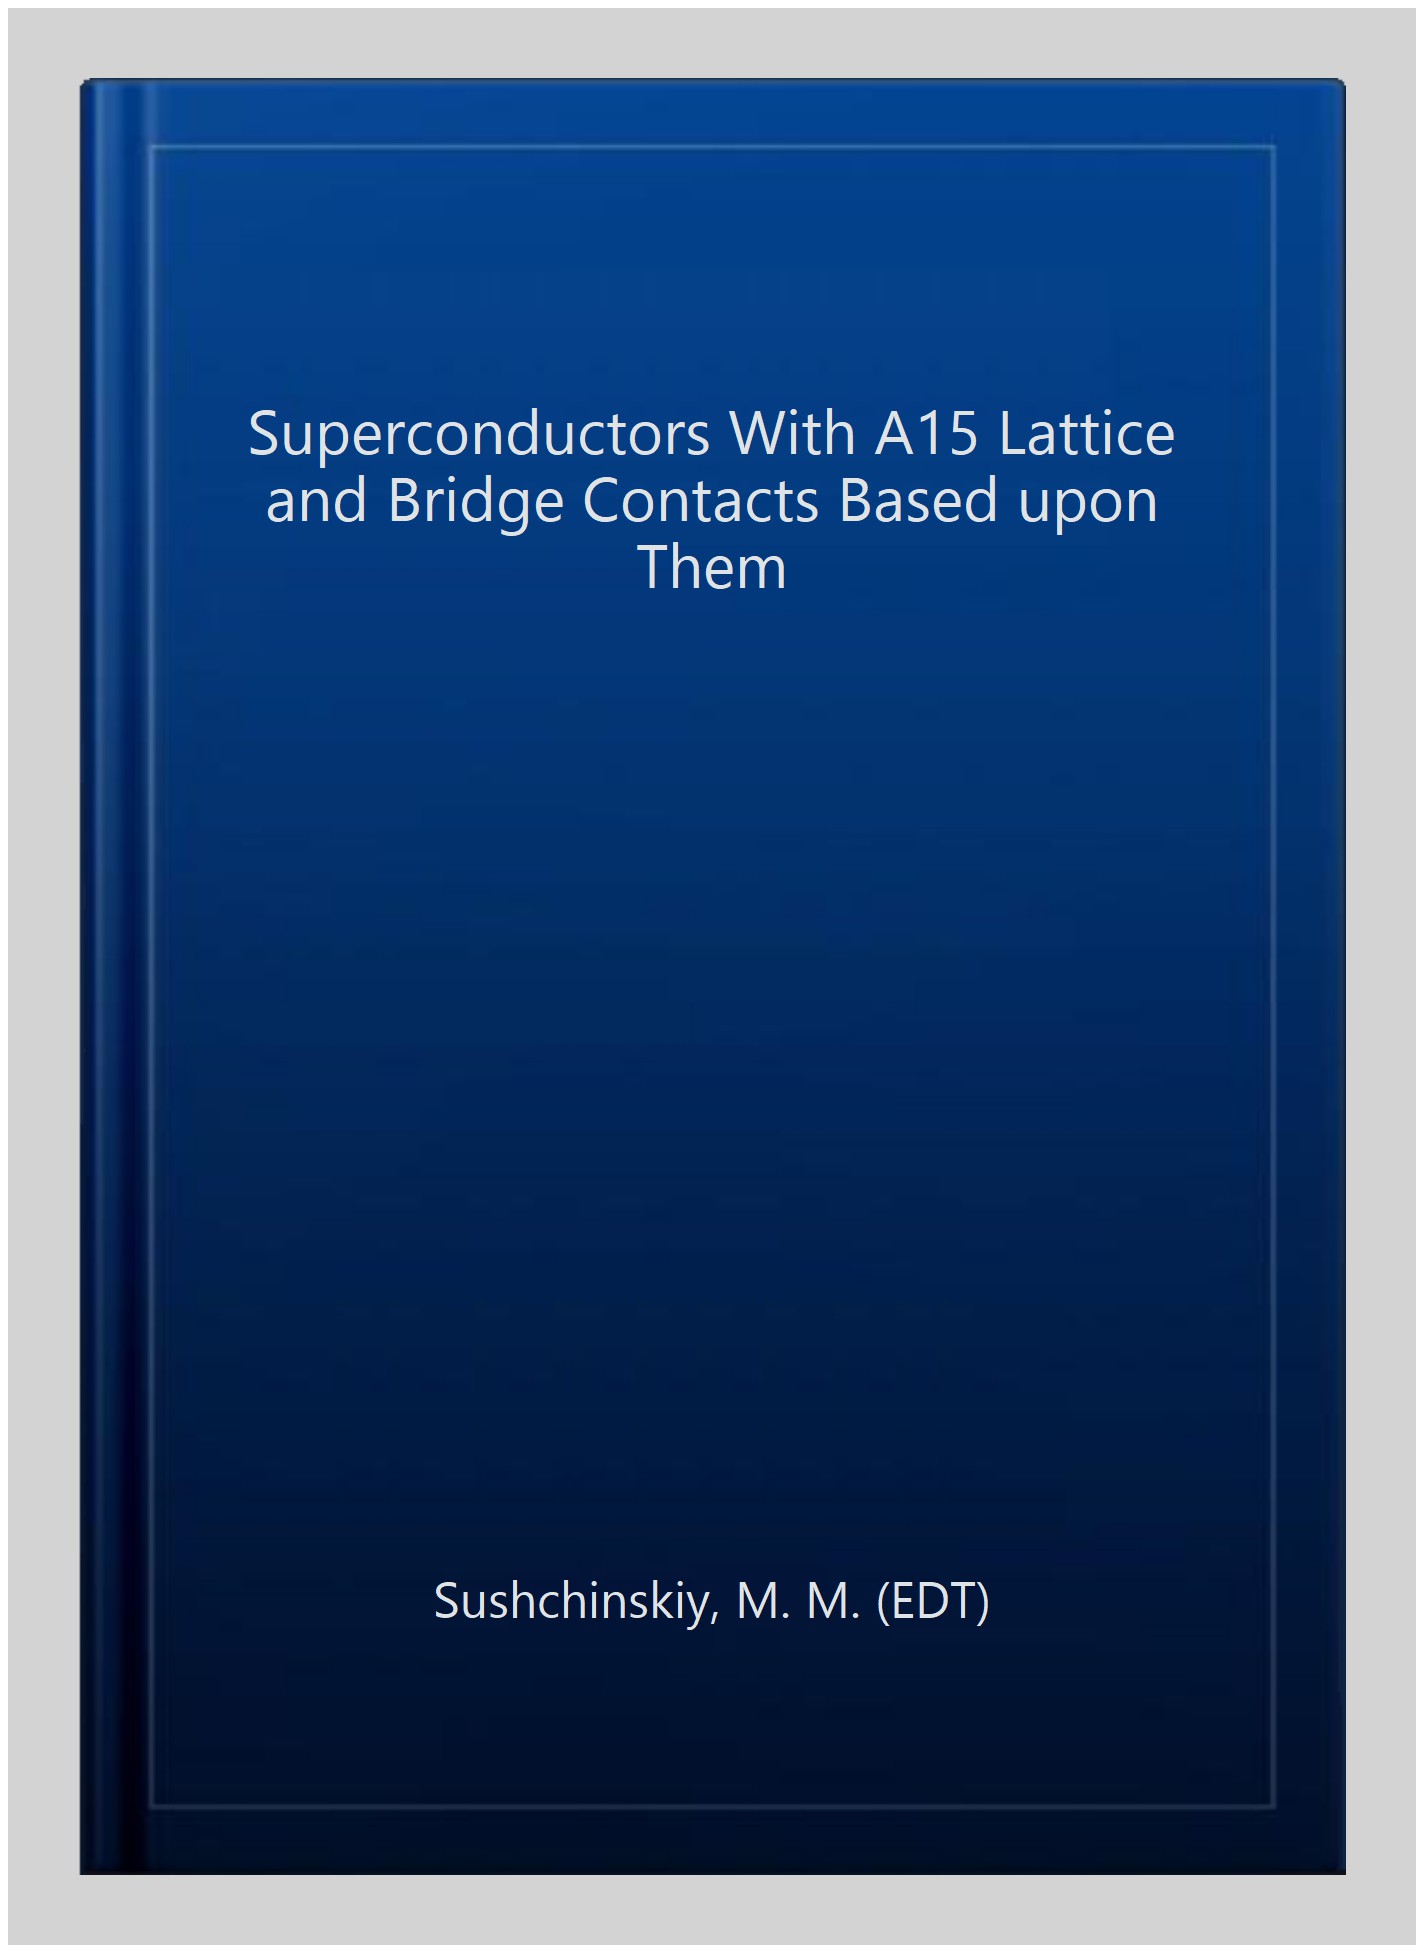 Superconductors With A15 Lattice and Bridge Contacts Based upon Them - Sushchinskiy, M. M. (EDT)